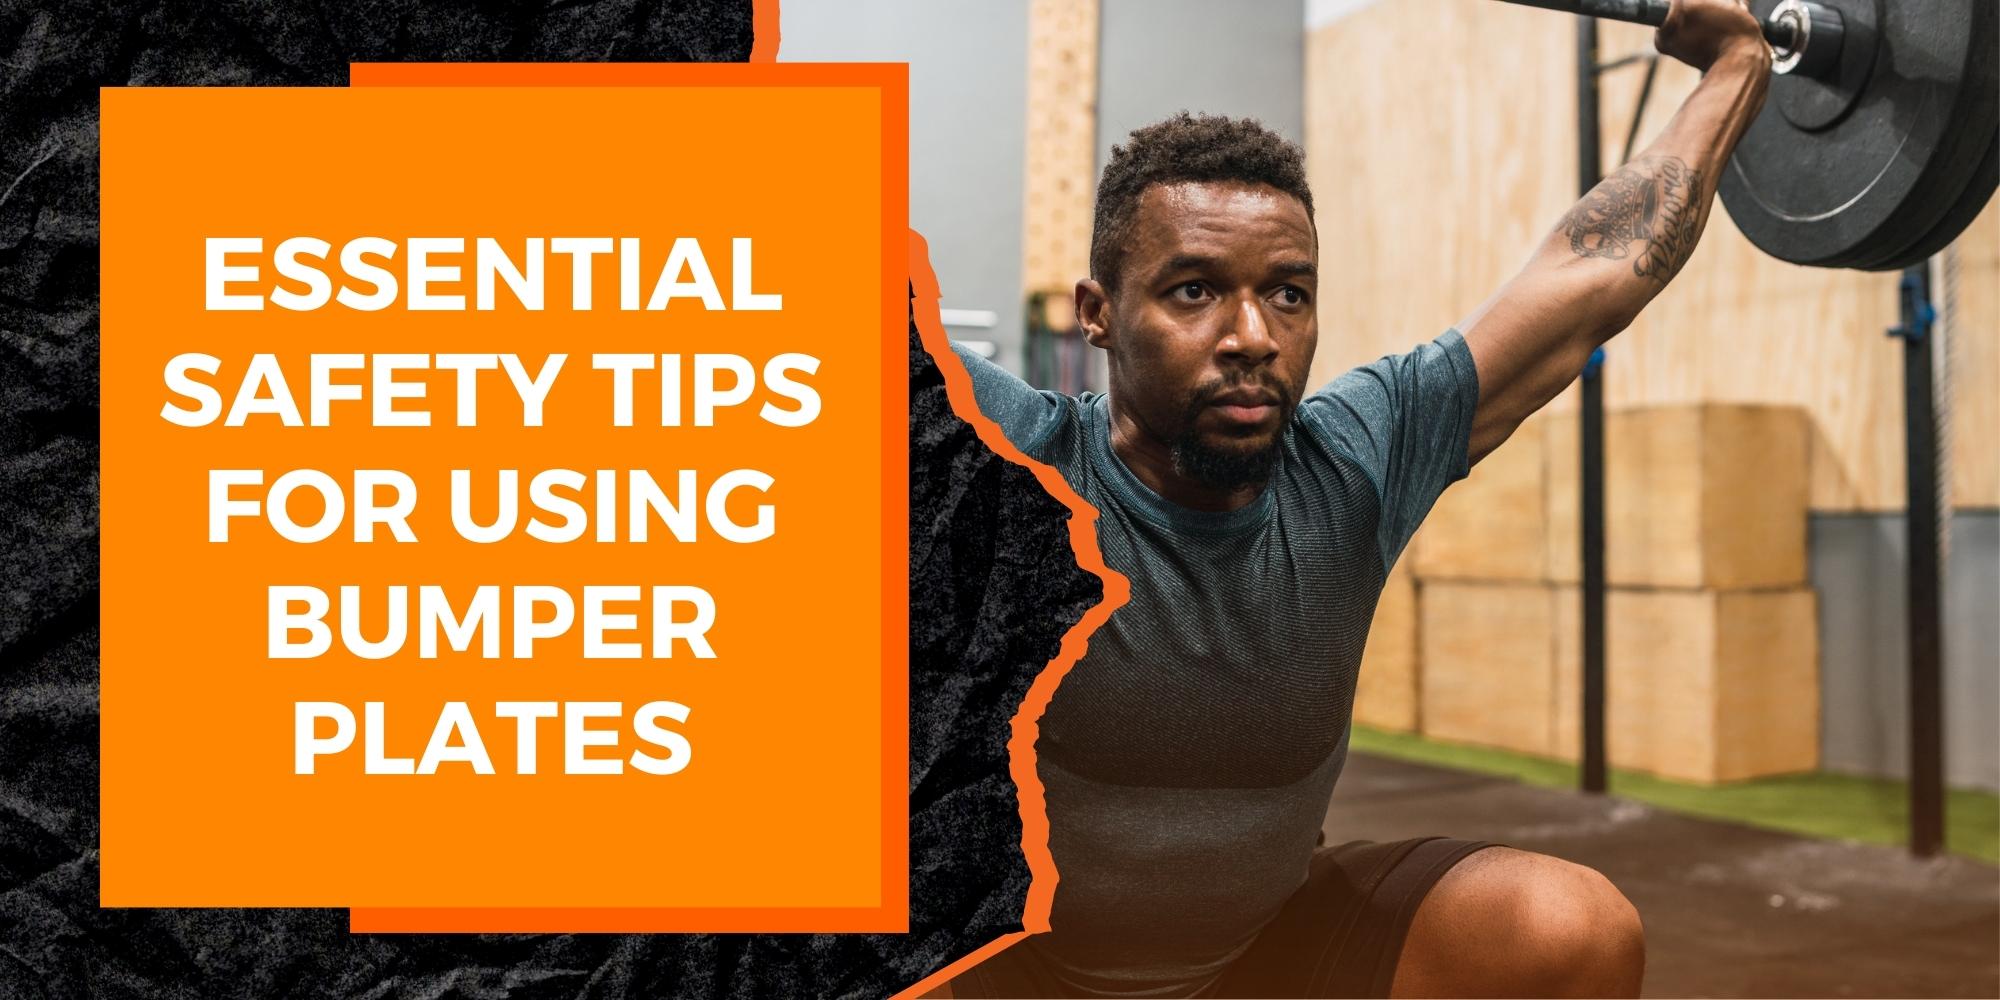 Essential Safety Tips for Using Bumper Plates